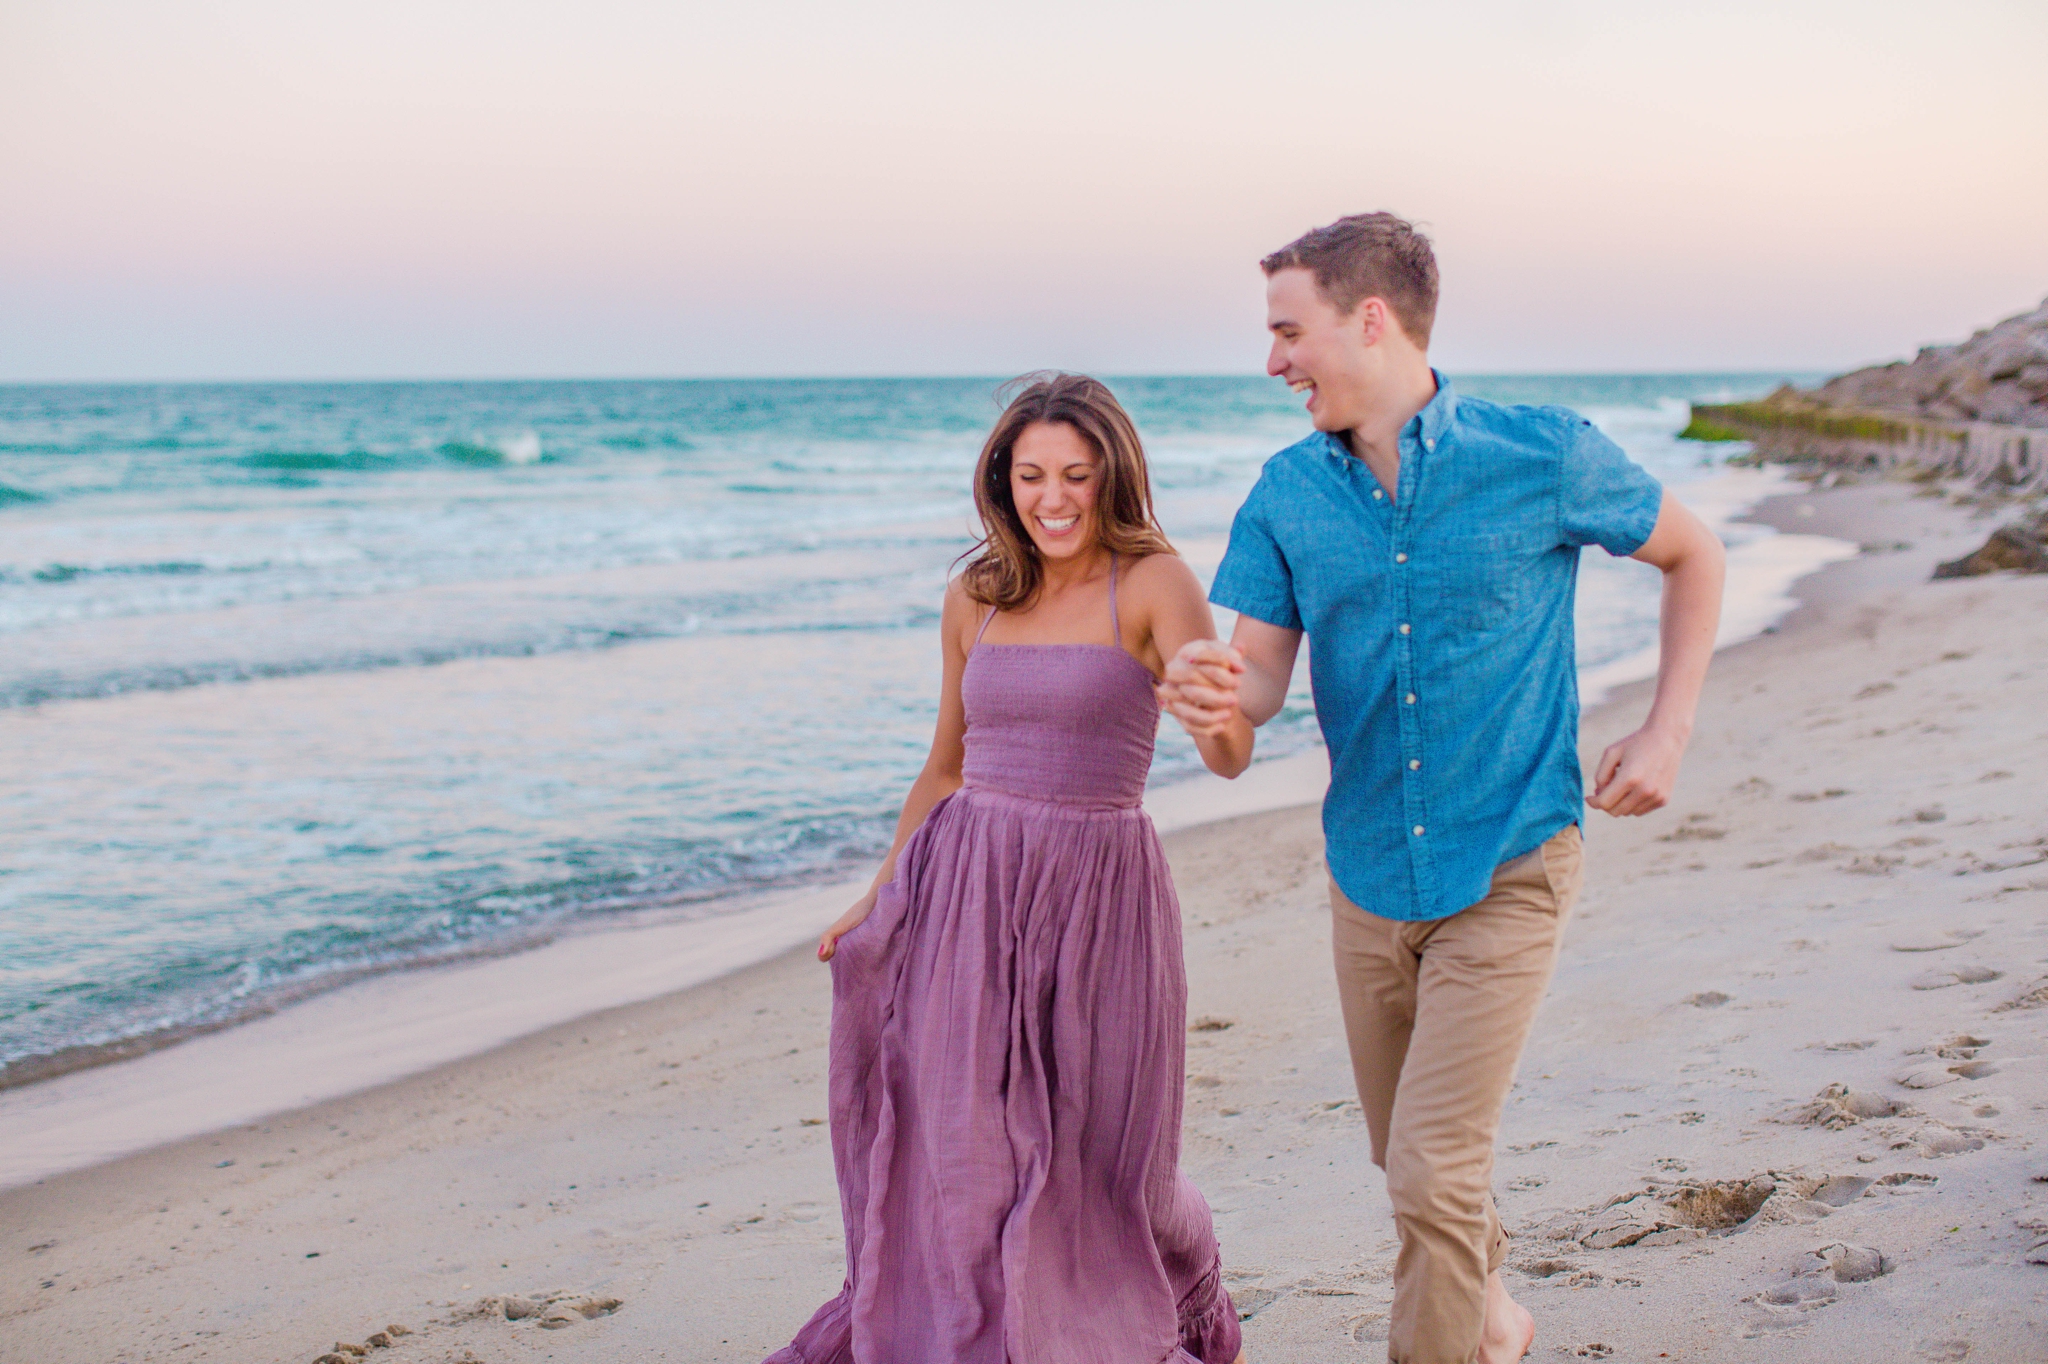  man and woman running on the beach and laughing - Woman is in a flowy pastel maxi dress - candid and unposed golden light session - beach engagement photographer in honolulu, oahu, hawaii - johanna dye photography 